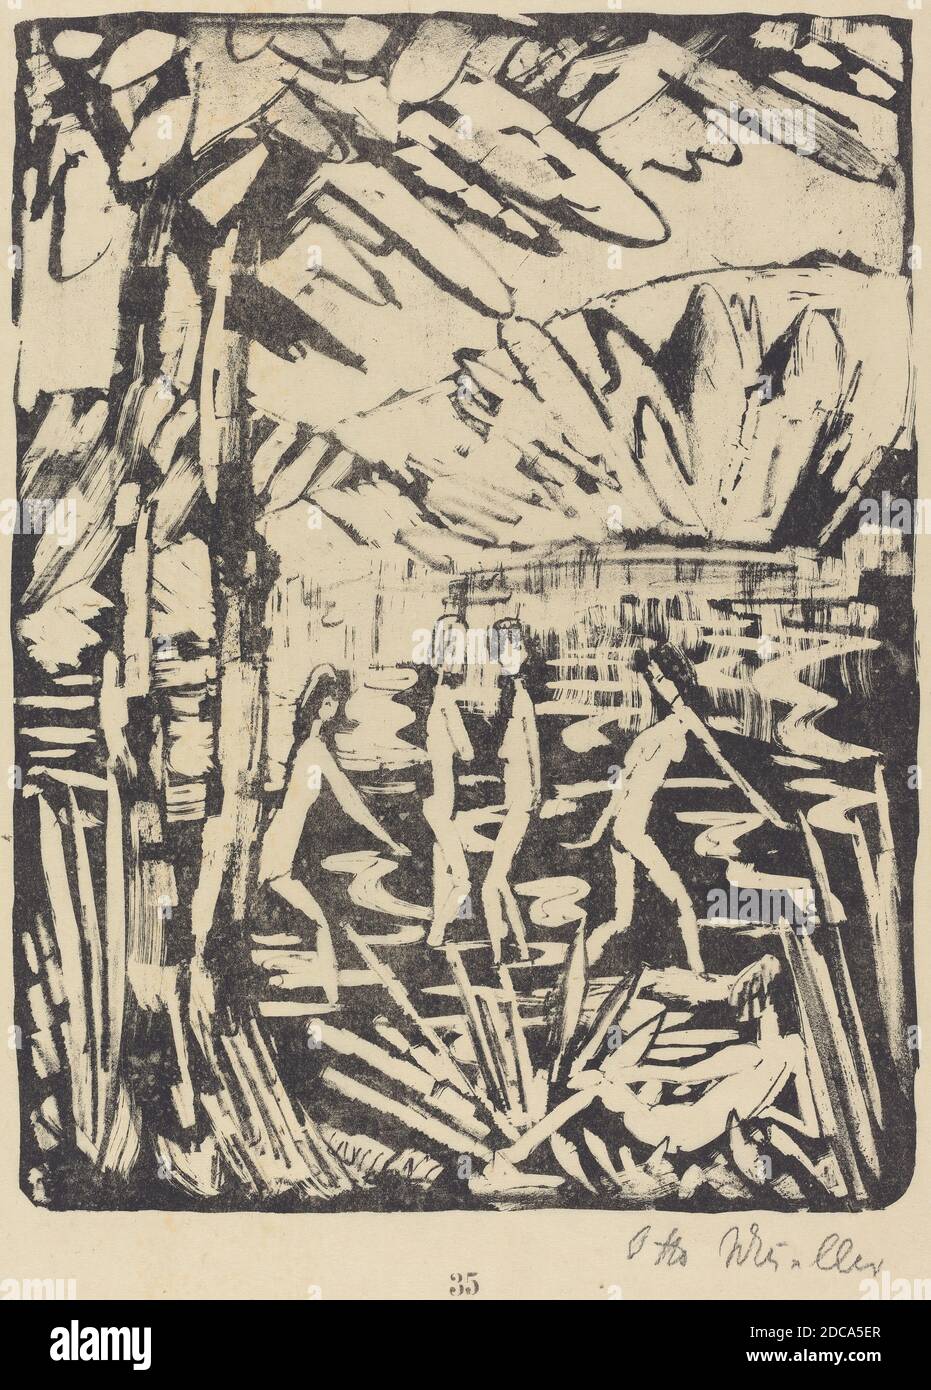 Otto Müller, (artist), German, 1874 - 1930, Five Girls at a Forest Pond (Funf Madchen am Waldteich), c. 1919, lithograph Stock Photo